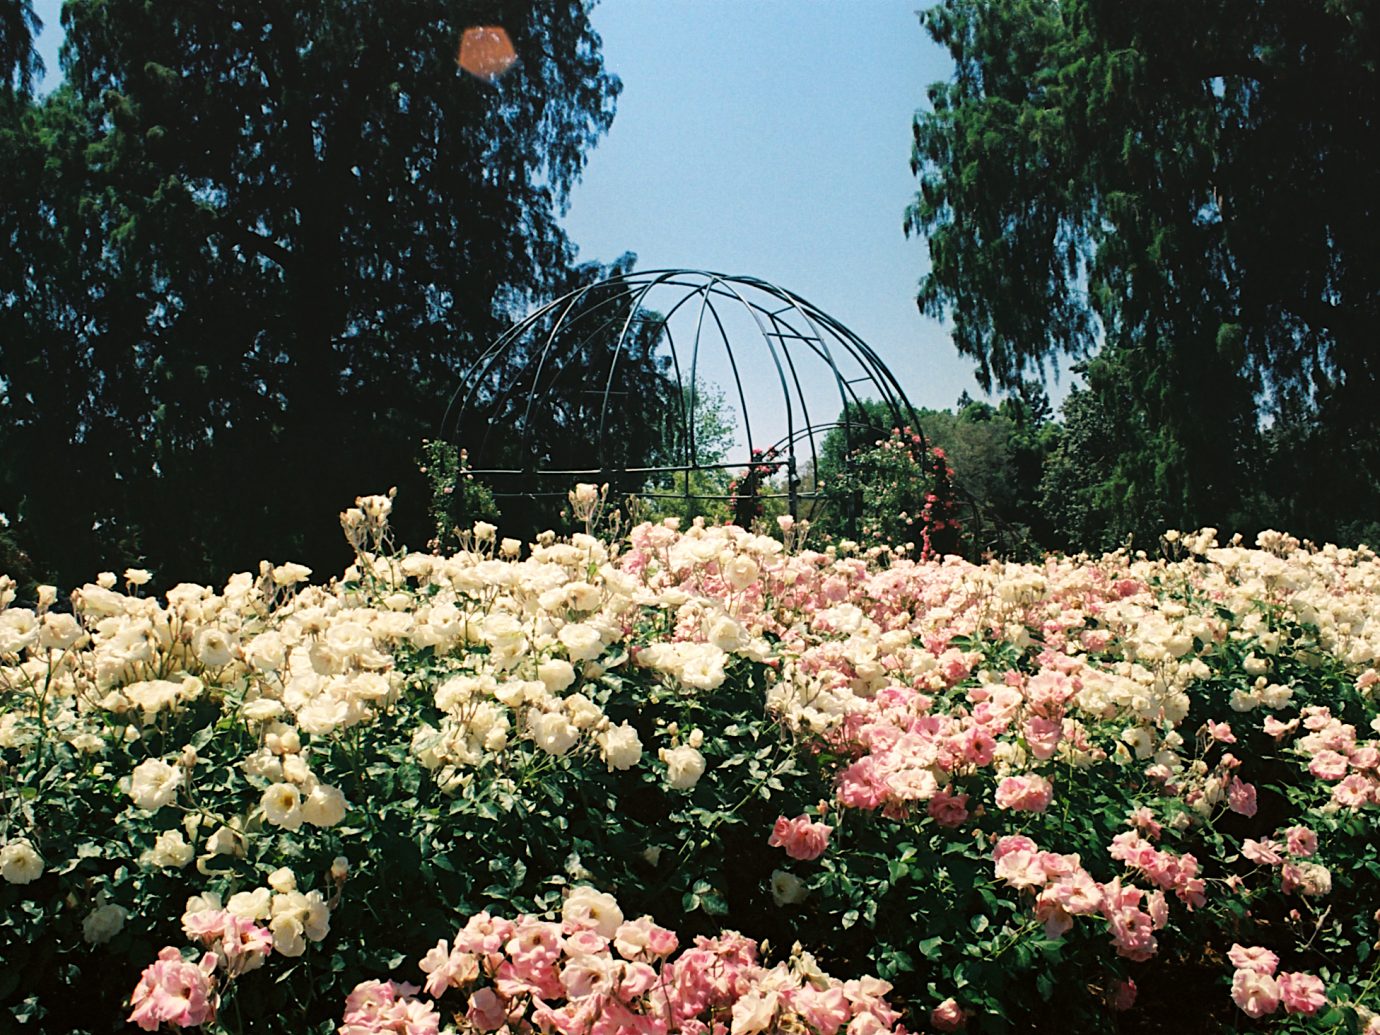 A view of the gazebo at the Huntington Library Rose Garden